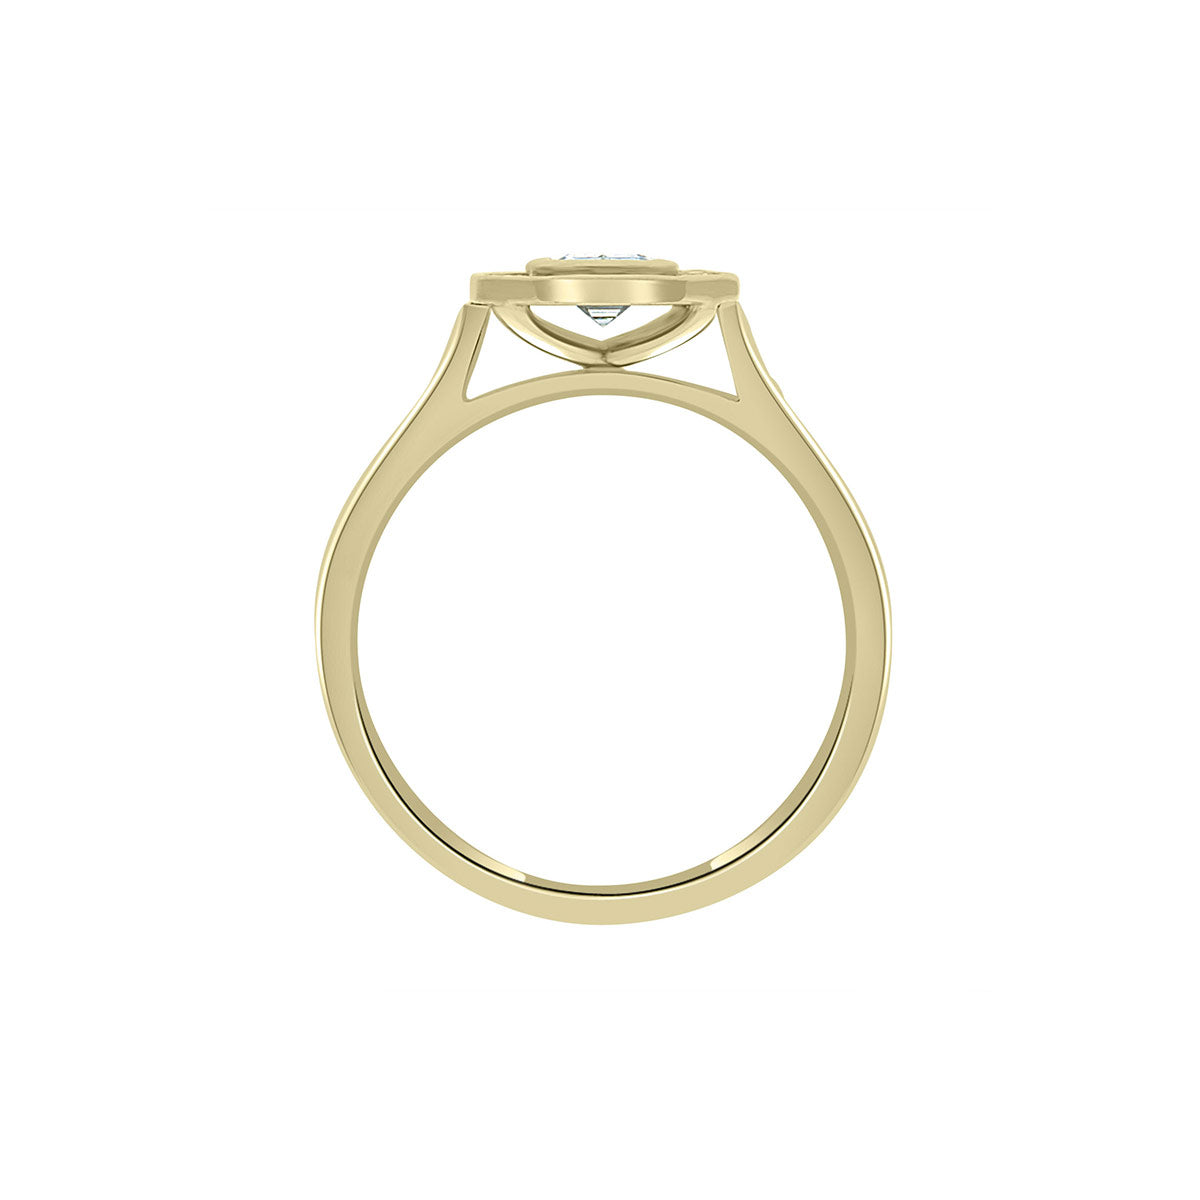 Emerald Cut Halo Ring in yellow gold in an upright position